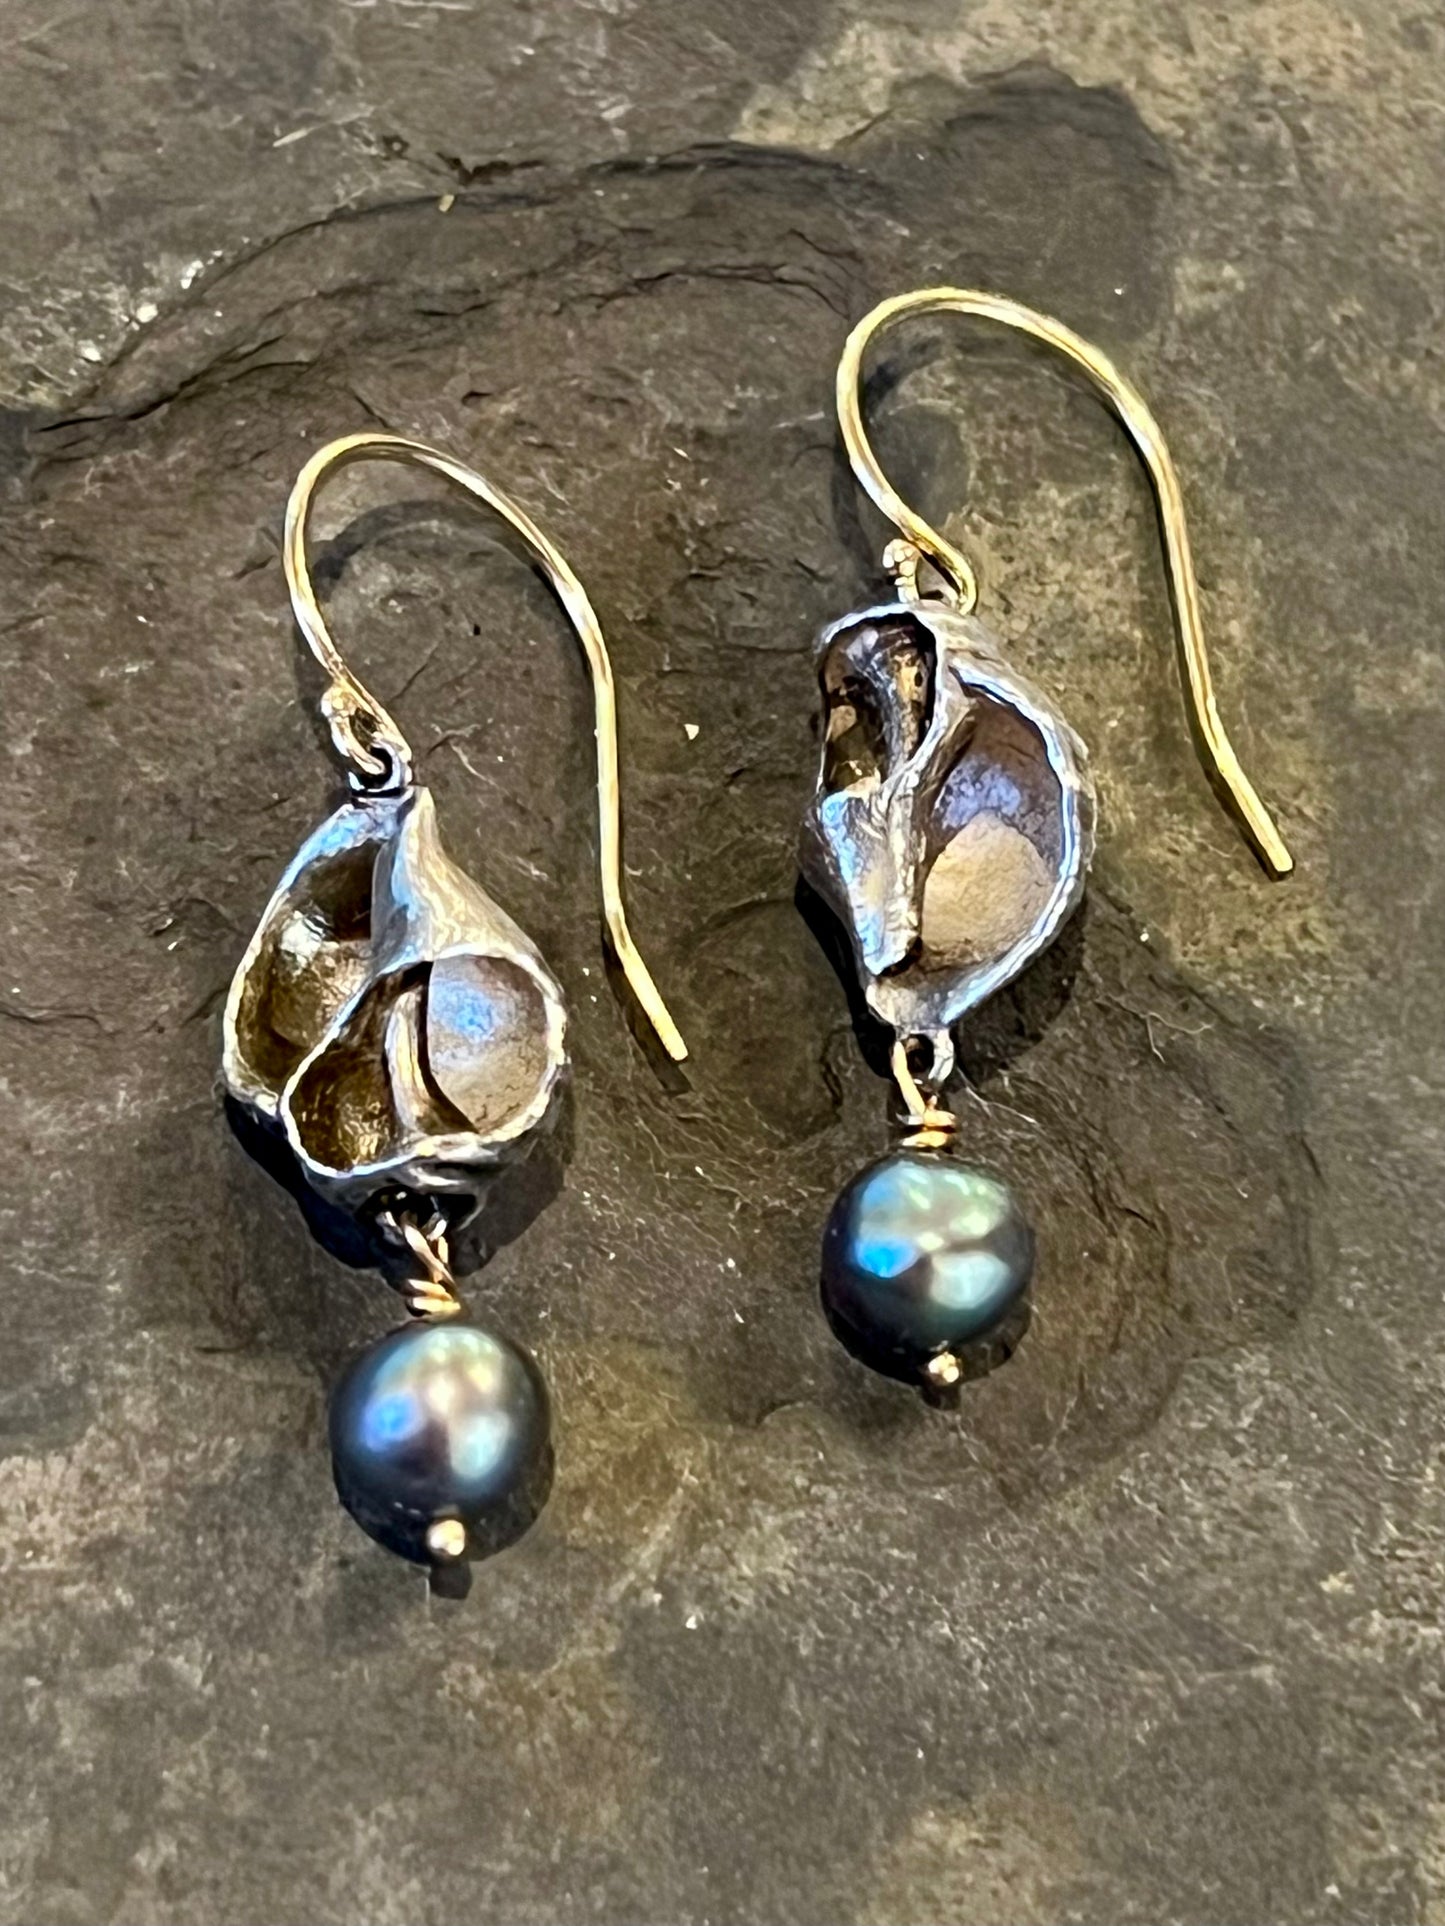 Small Eroded Conch Earrings with Freshwater Pearl - Salt Series